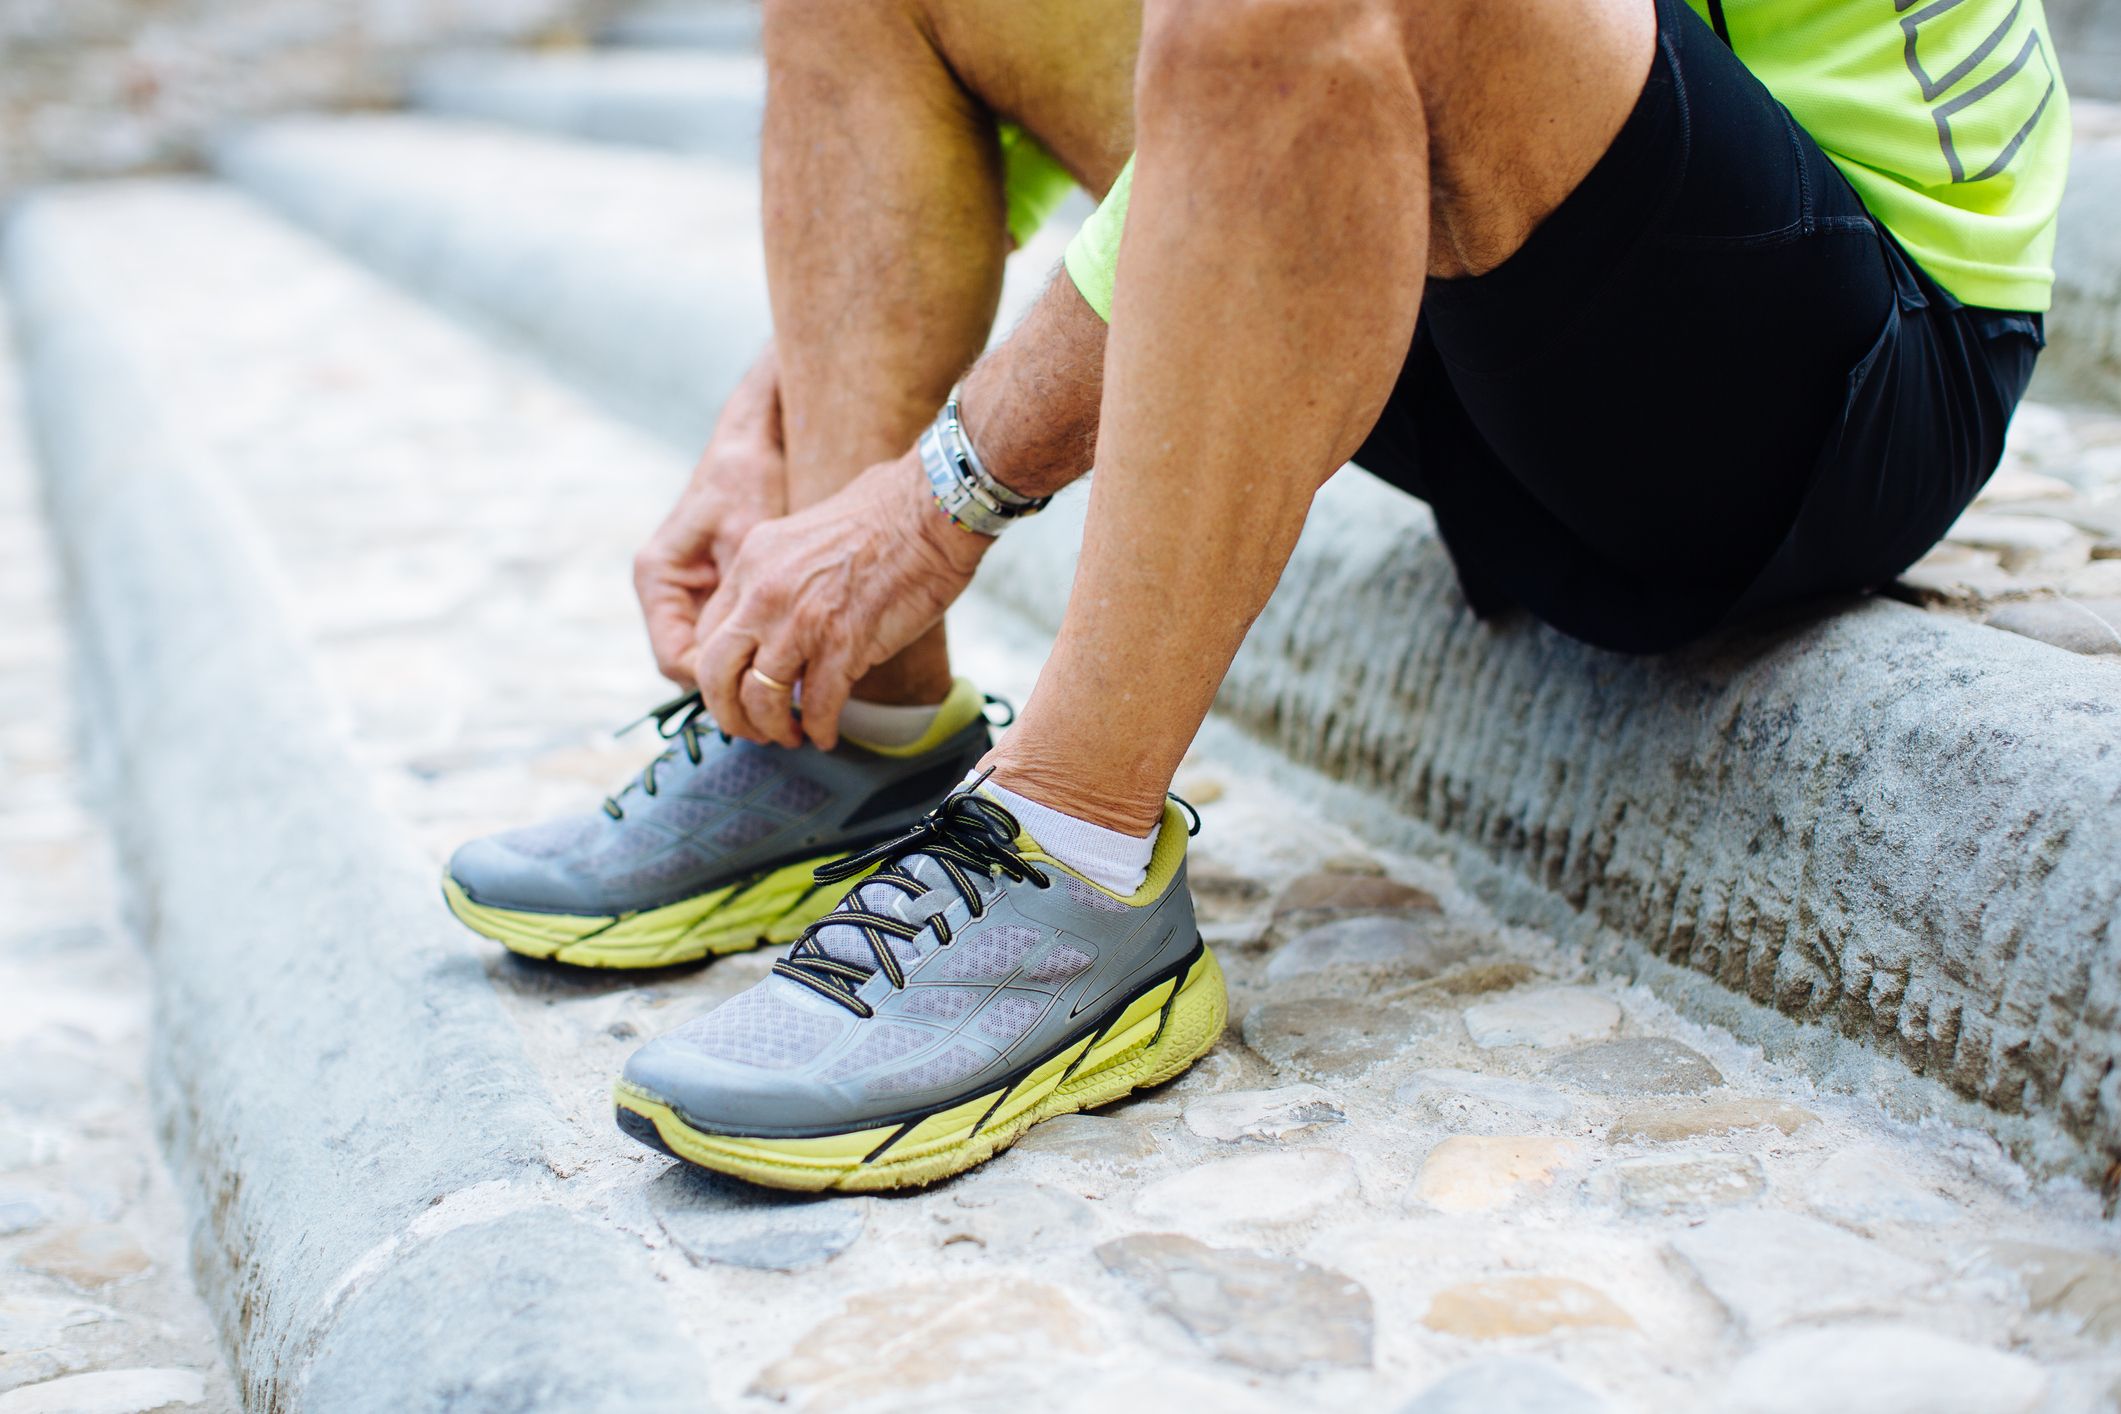 Your guide to fitting a running shoe